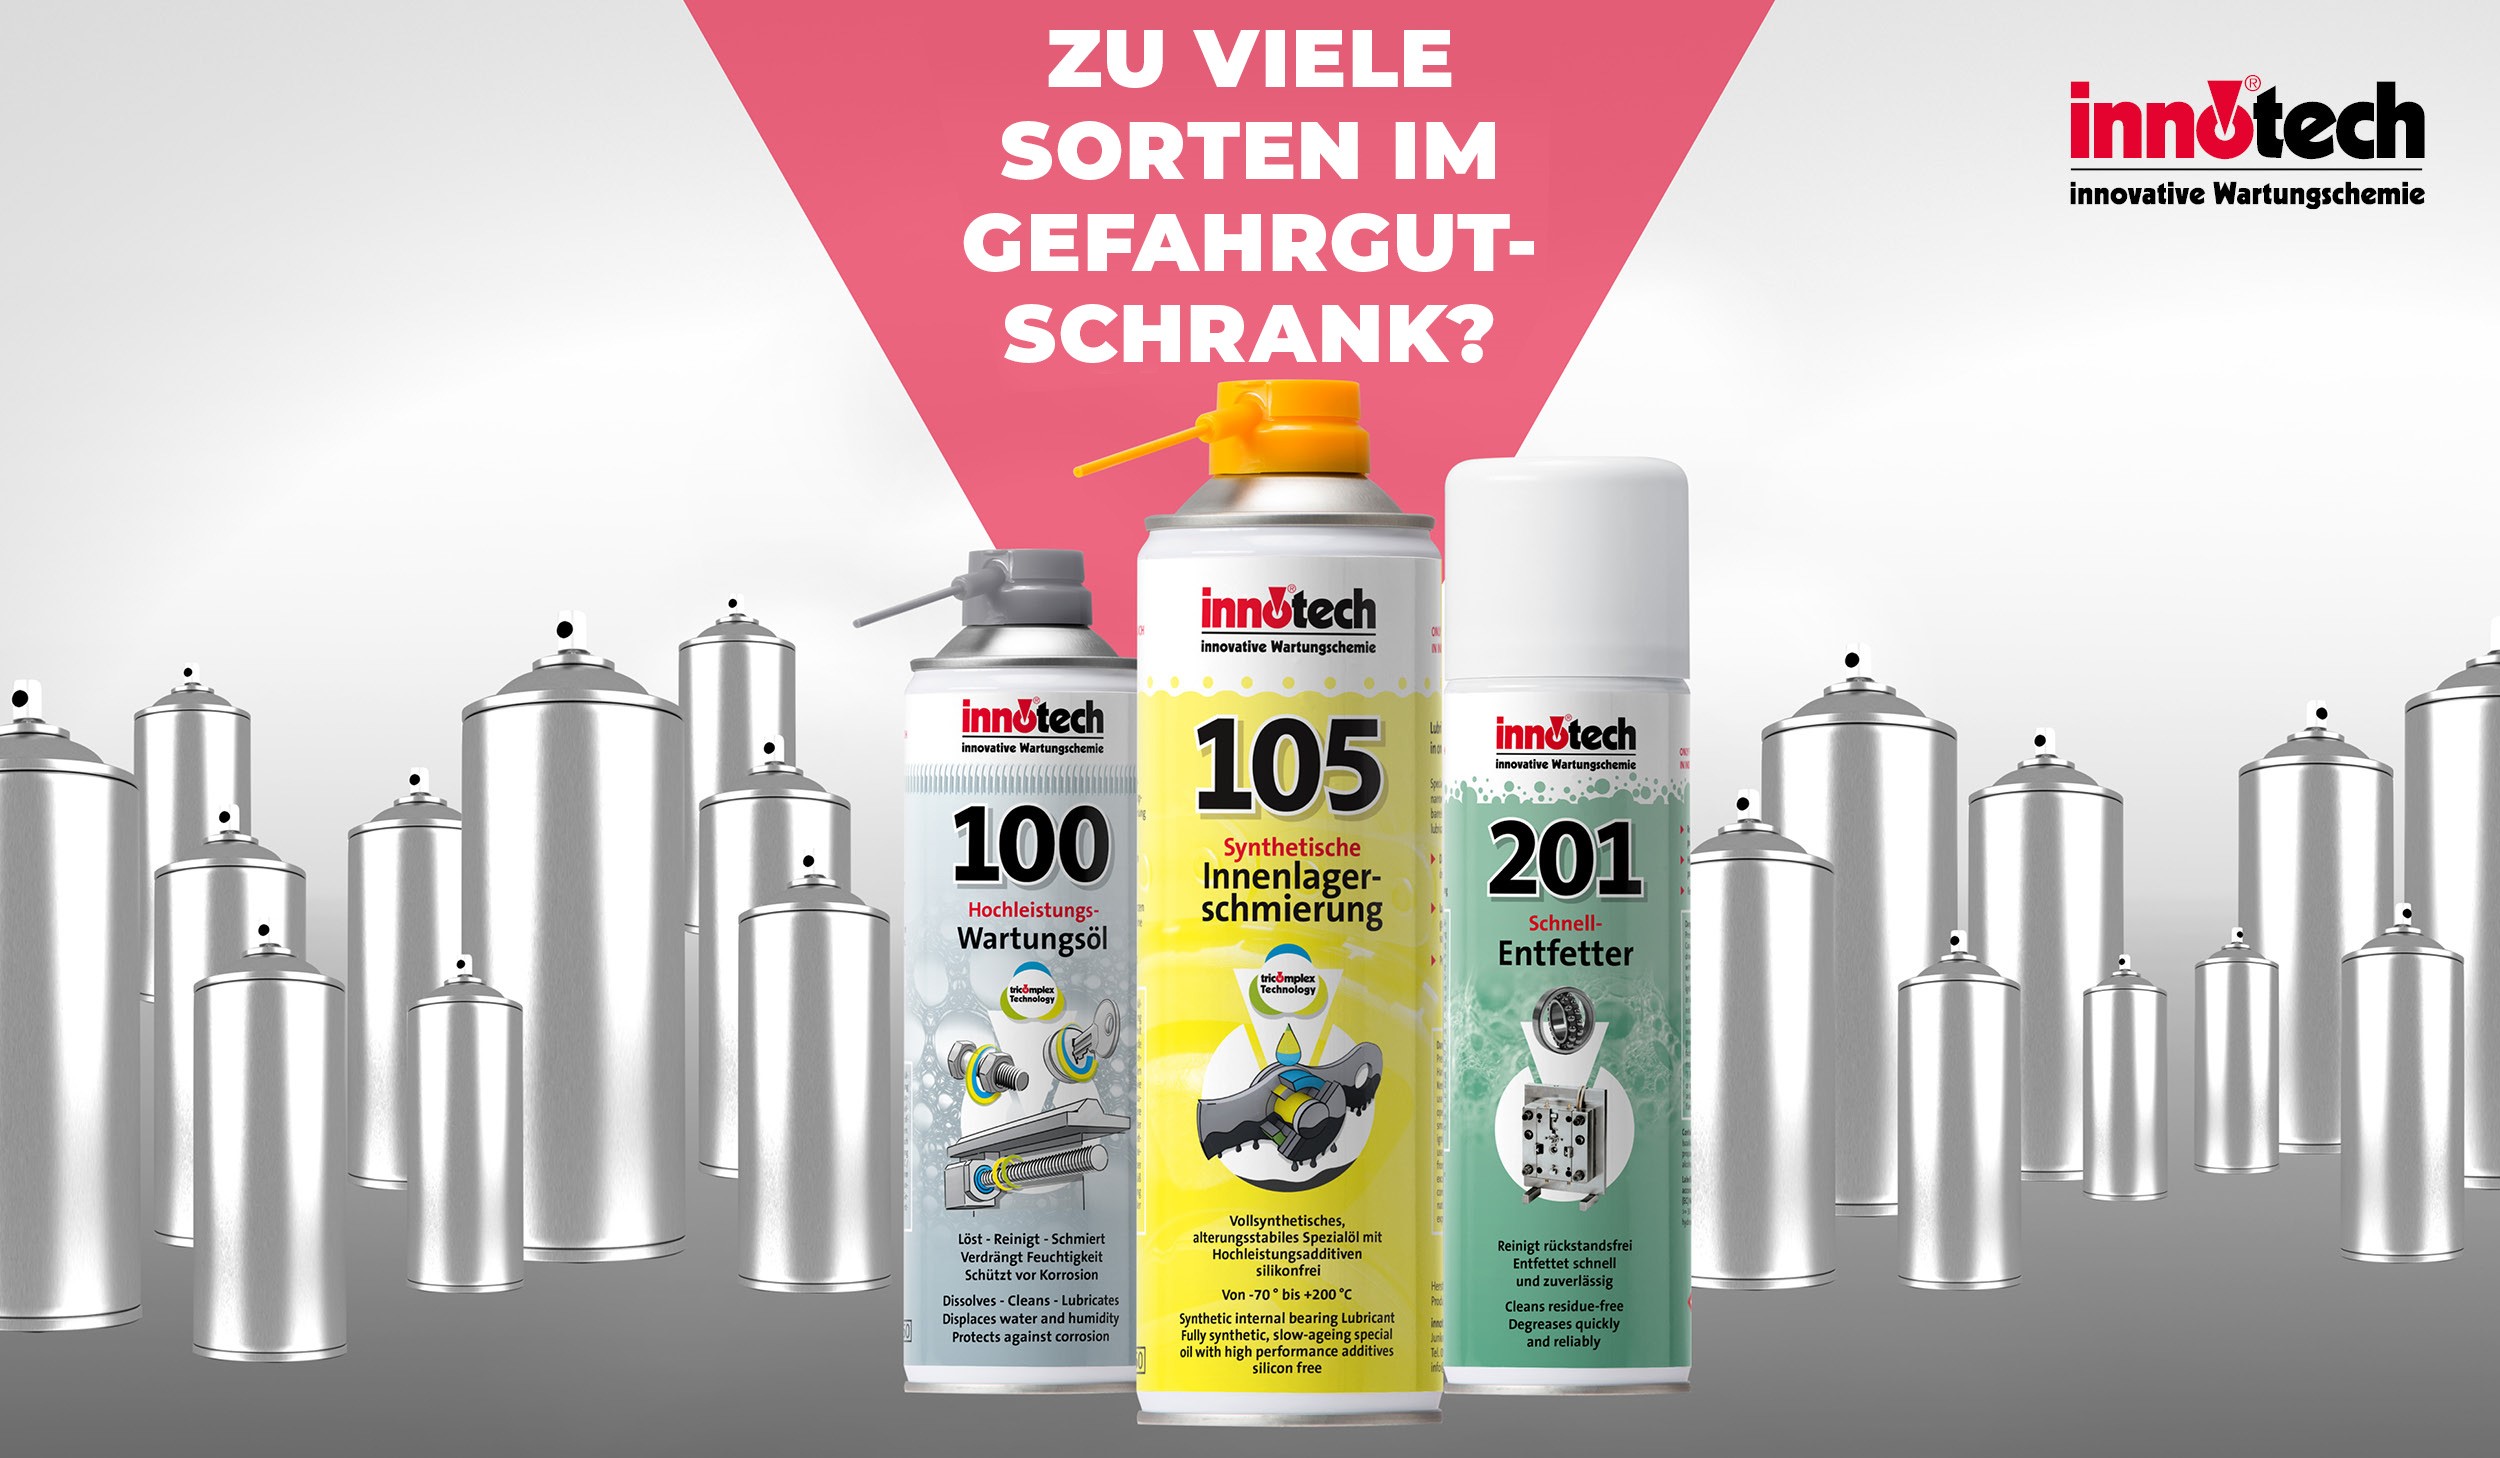 Using the maintenance & servicing products of innotech GmbH to reduce excessive product numbers